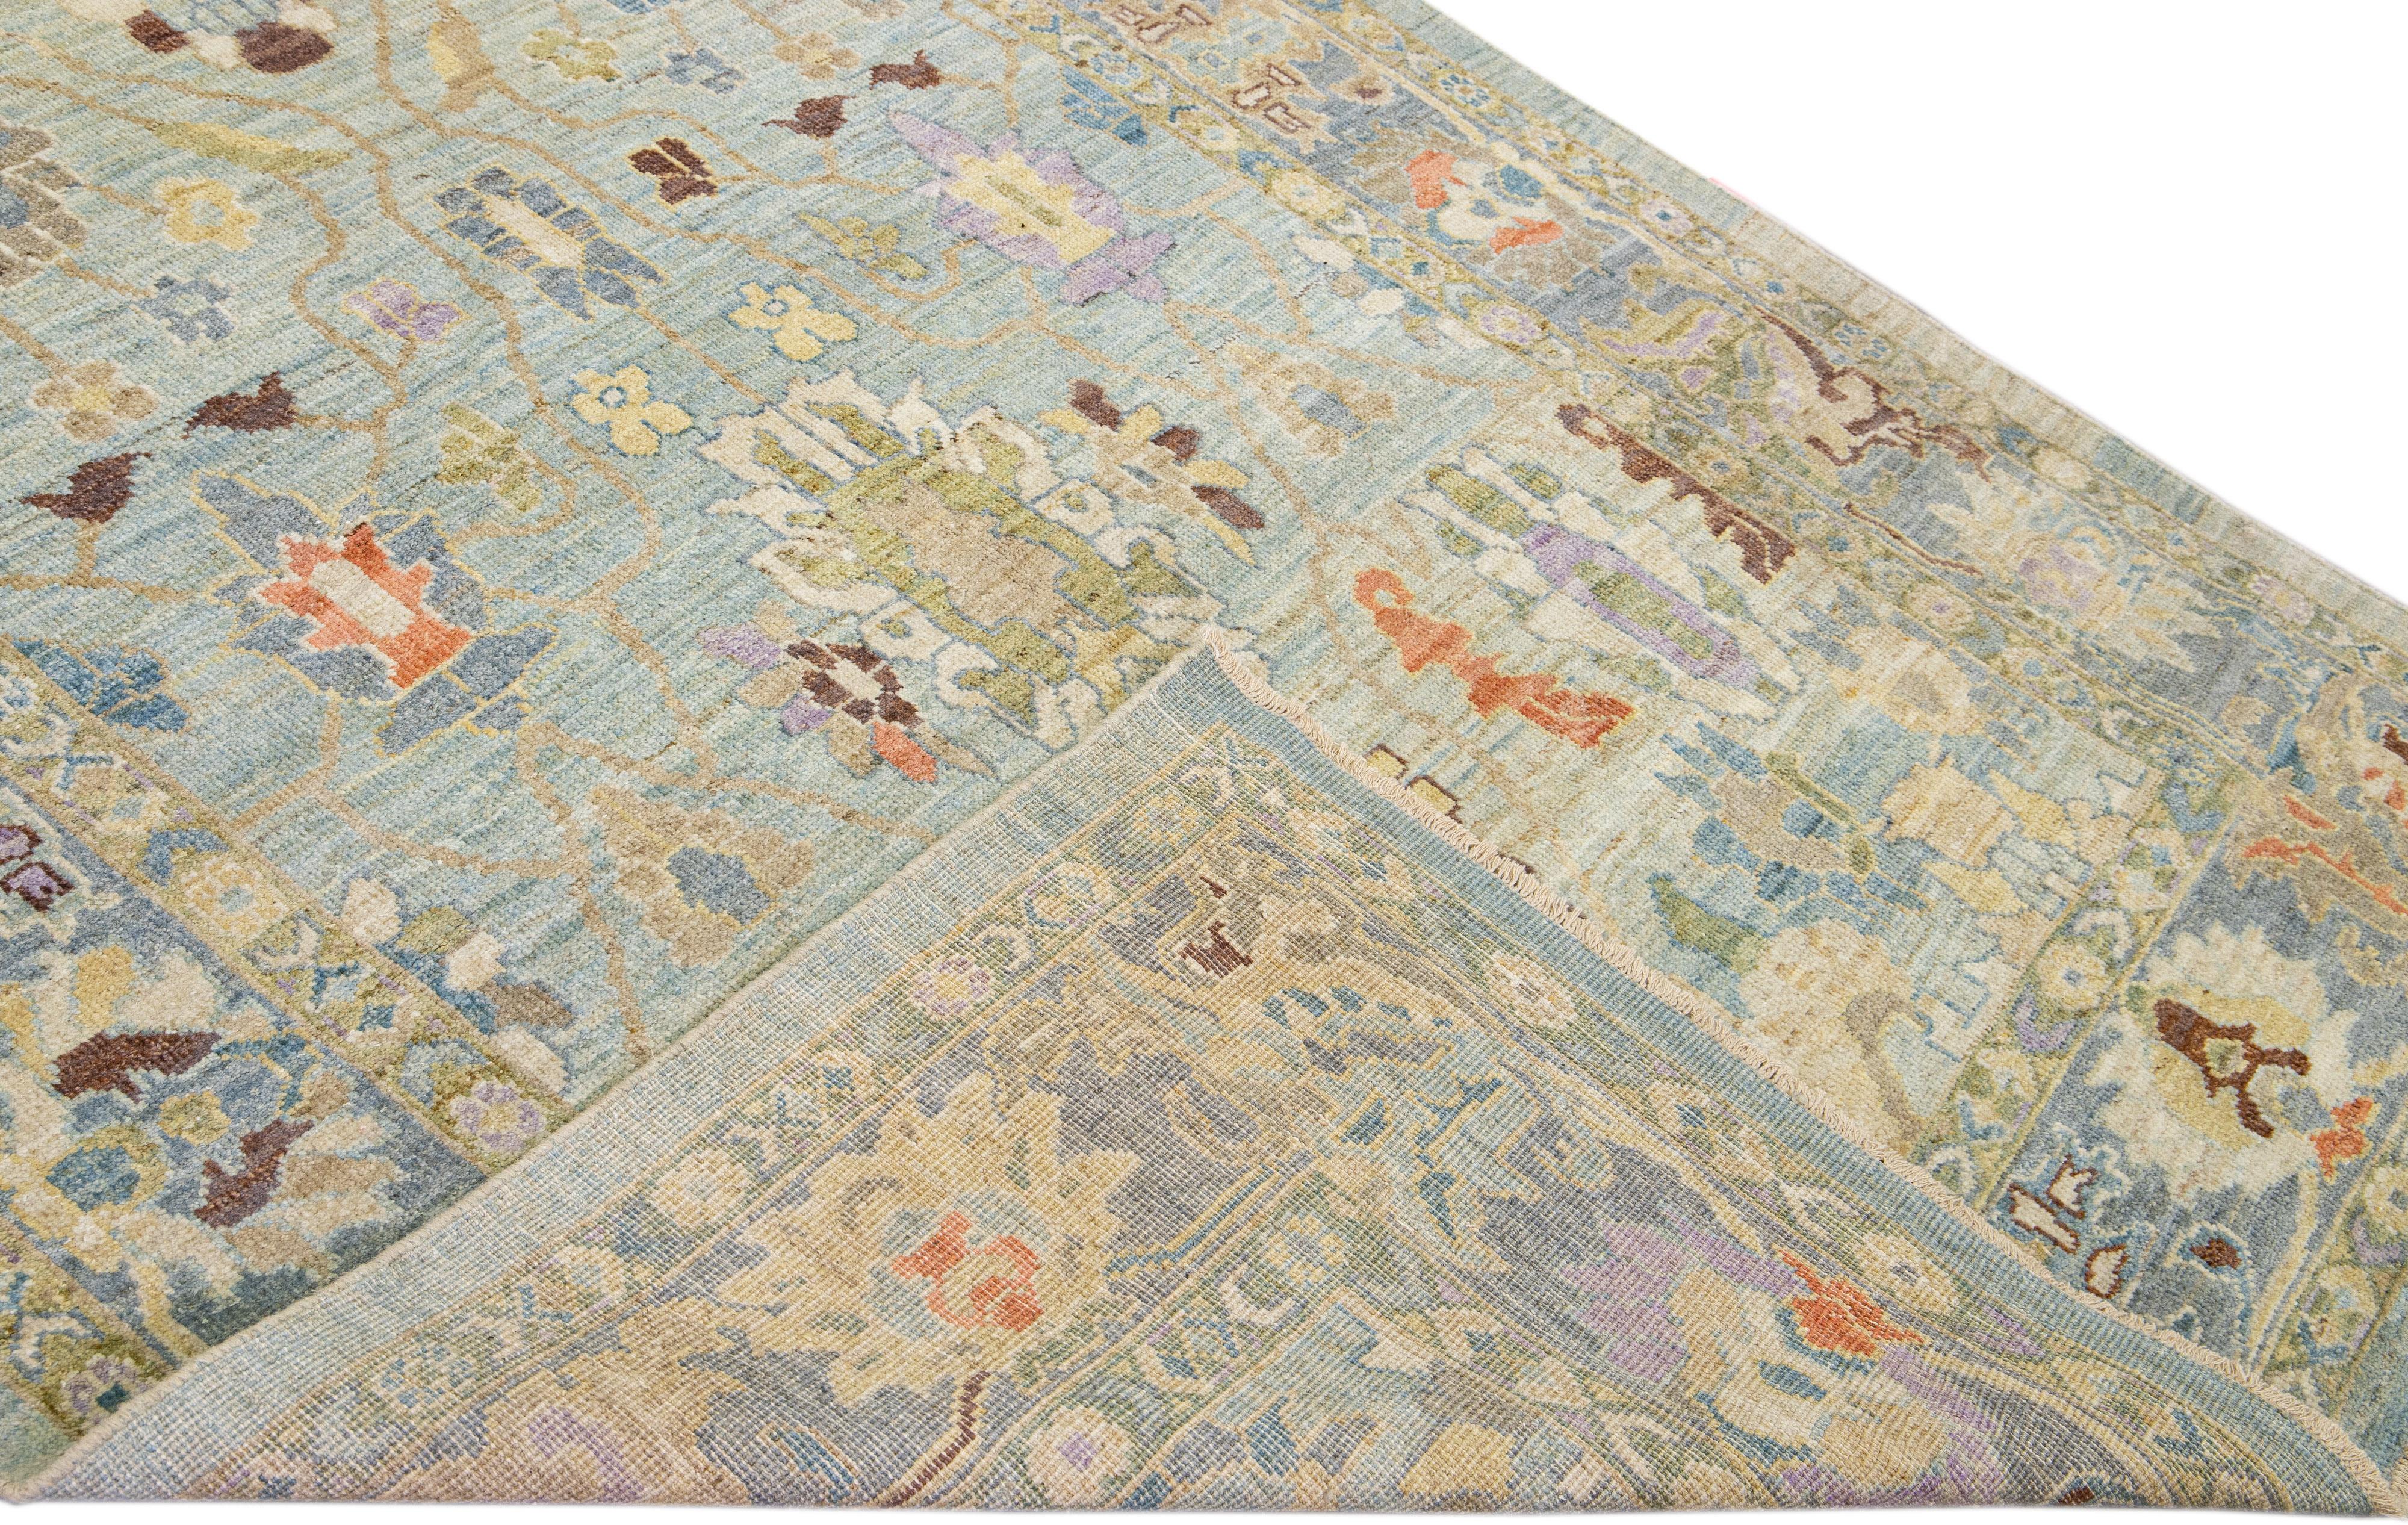 Beautiful modern Mahal hand-knotted wool runner with a light blue field. This Piece has multicolor accents in a gorgeous all-over Classic floral design.

This rug measures: 6' x 19'5